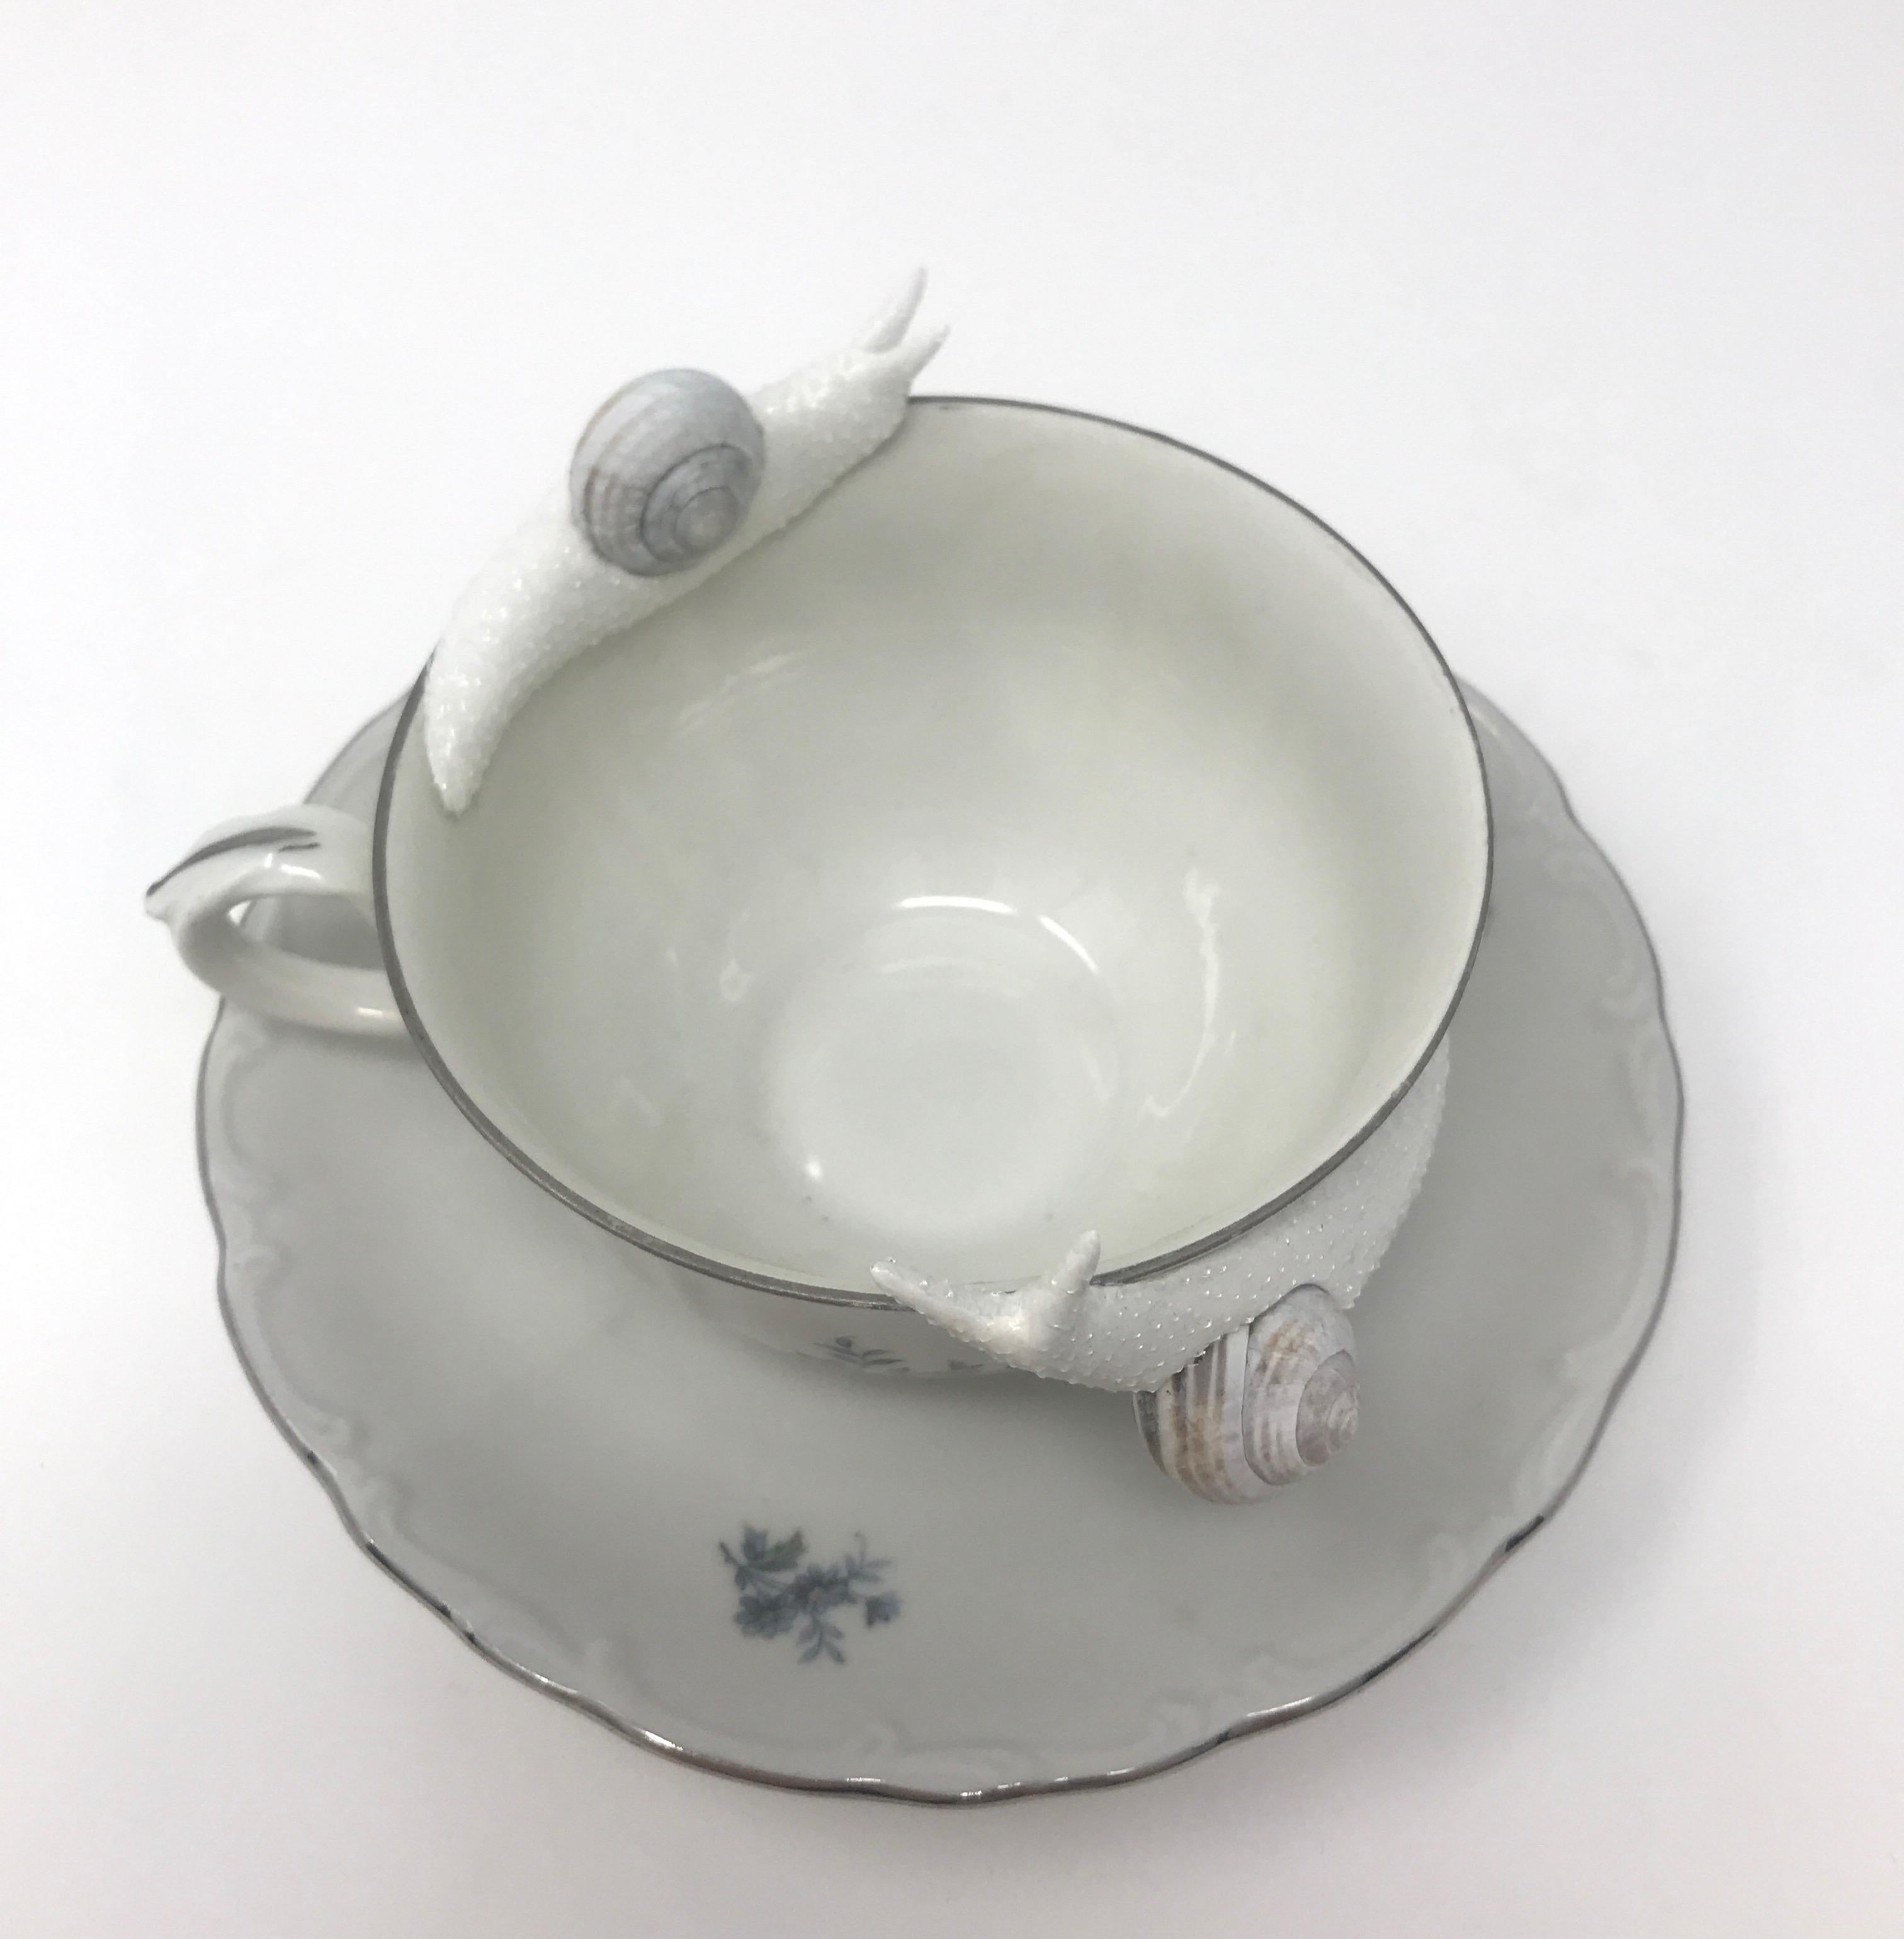 This piece was created with real found snail shells and a durable epoxy clay by New York artist, Bethany Krull.  She sculpts the undulating snail bodies to circle the delicate rim of the floral teacup.  The glistening wet bodies are surfaced with